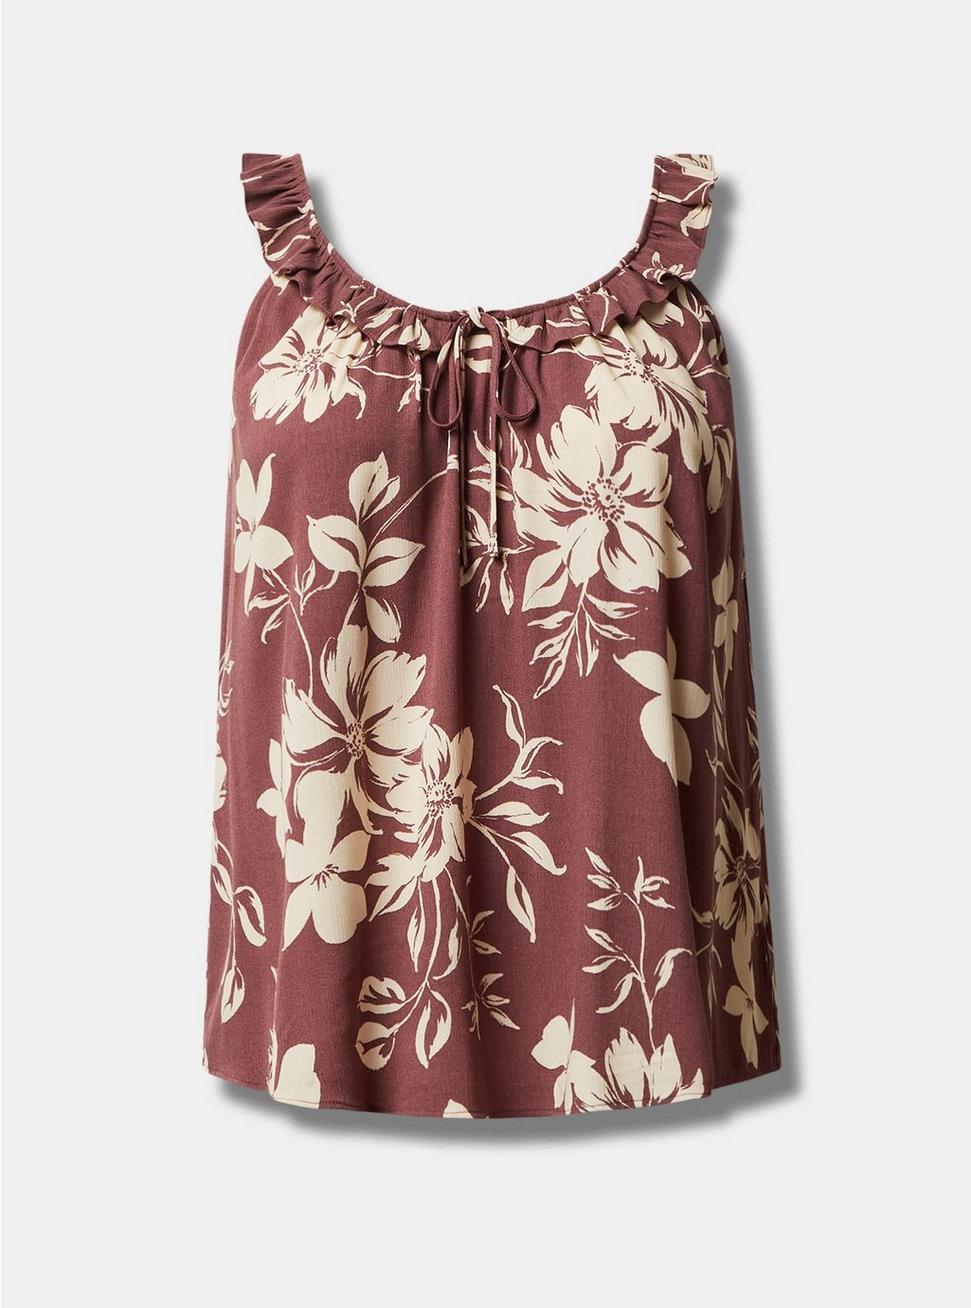 Washable Crinkle Gauze Ruffle Tie Front Tank, EMMA FLORAL, hi-res